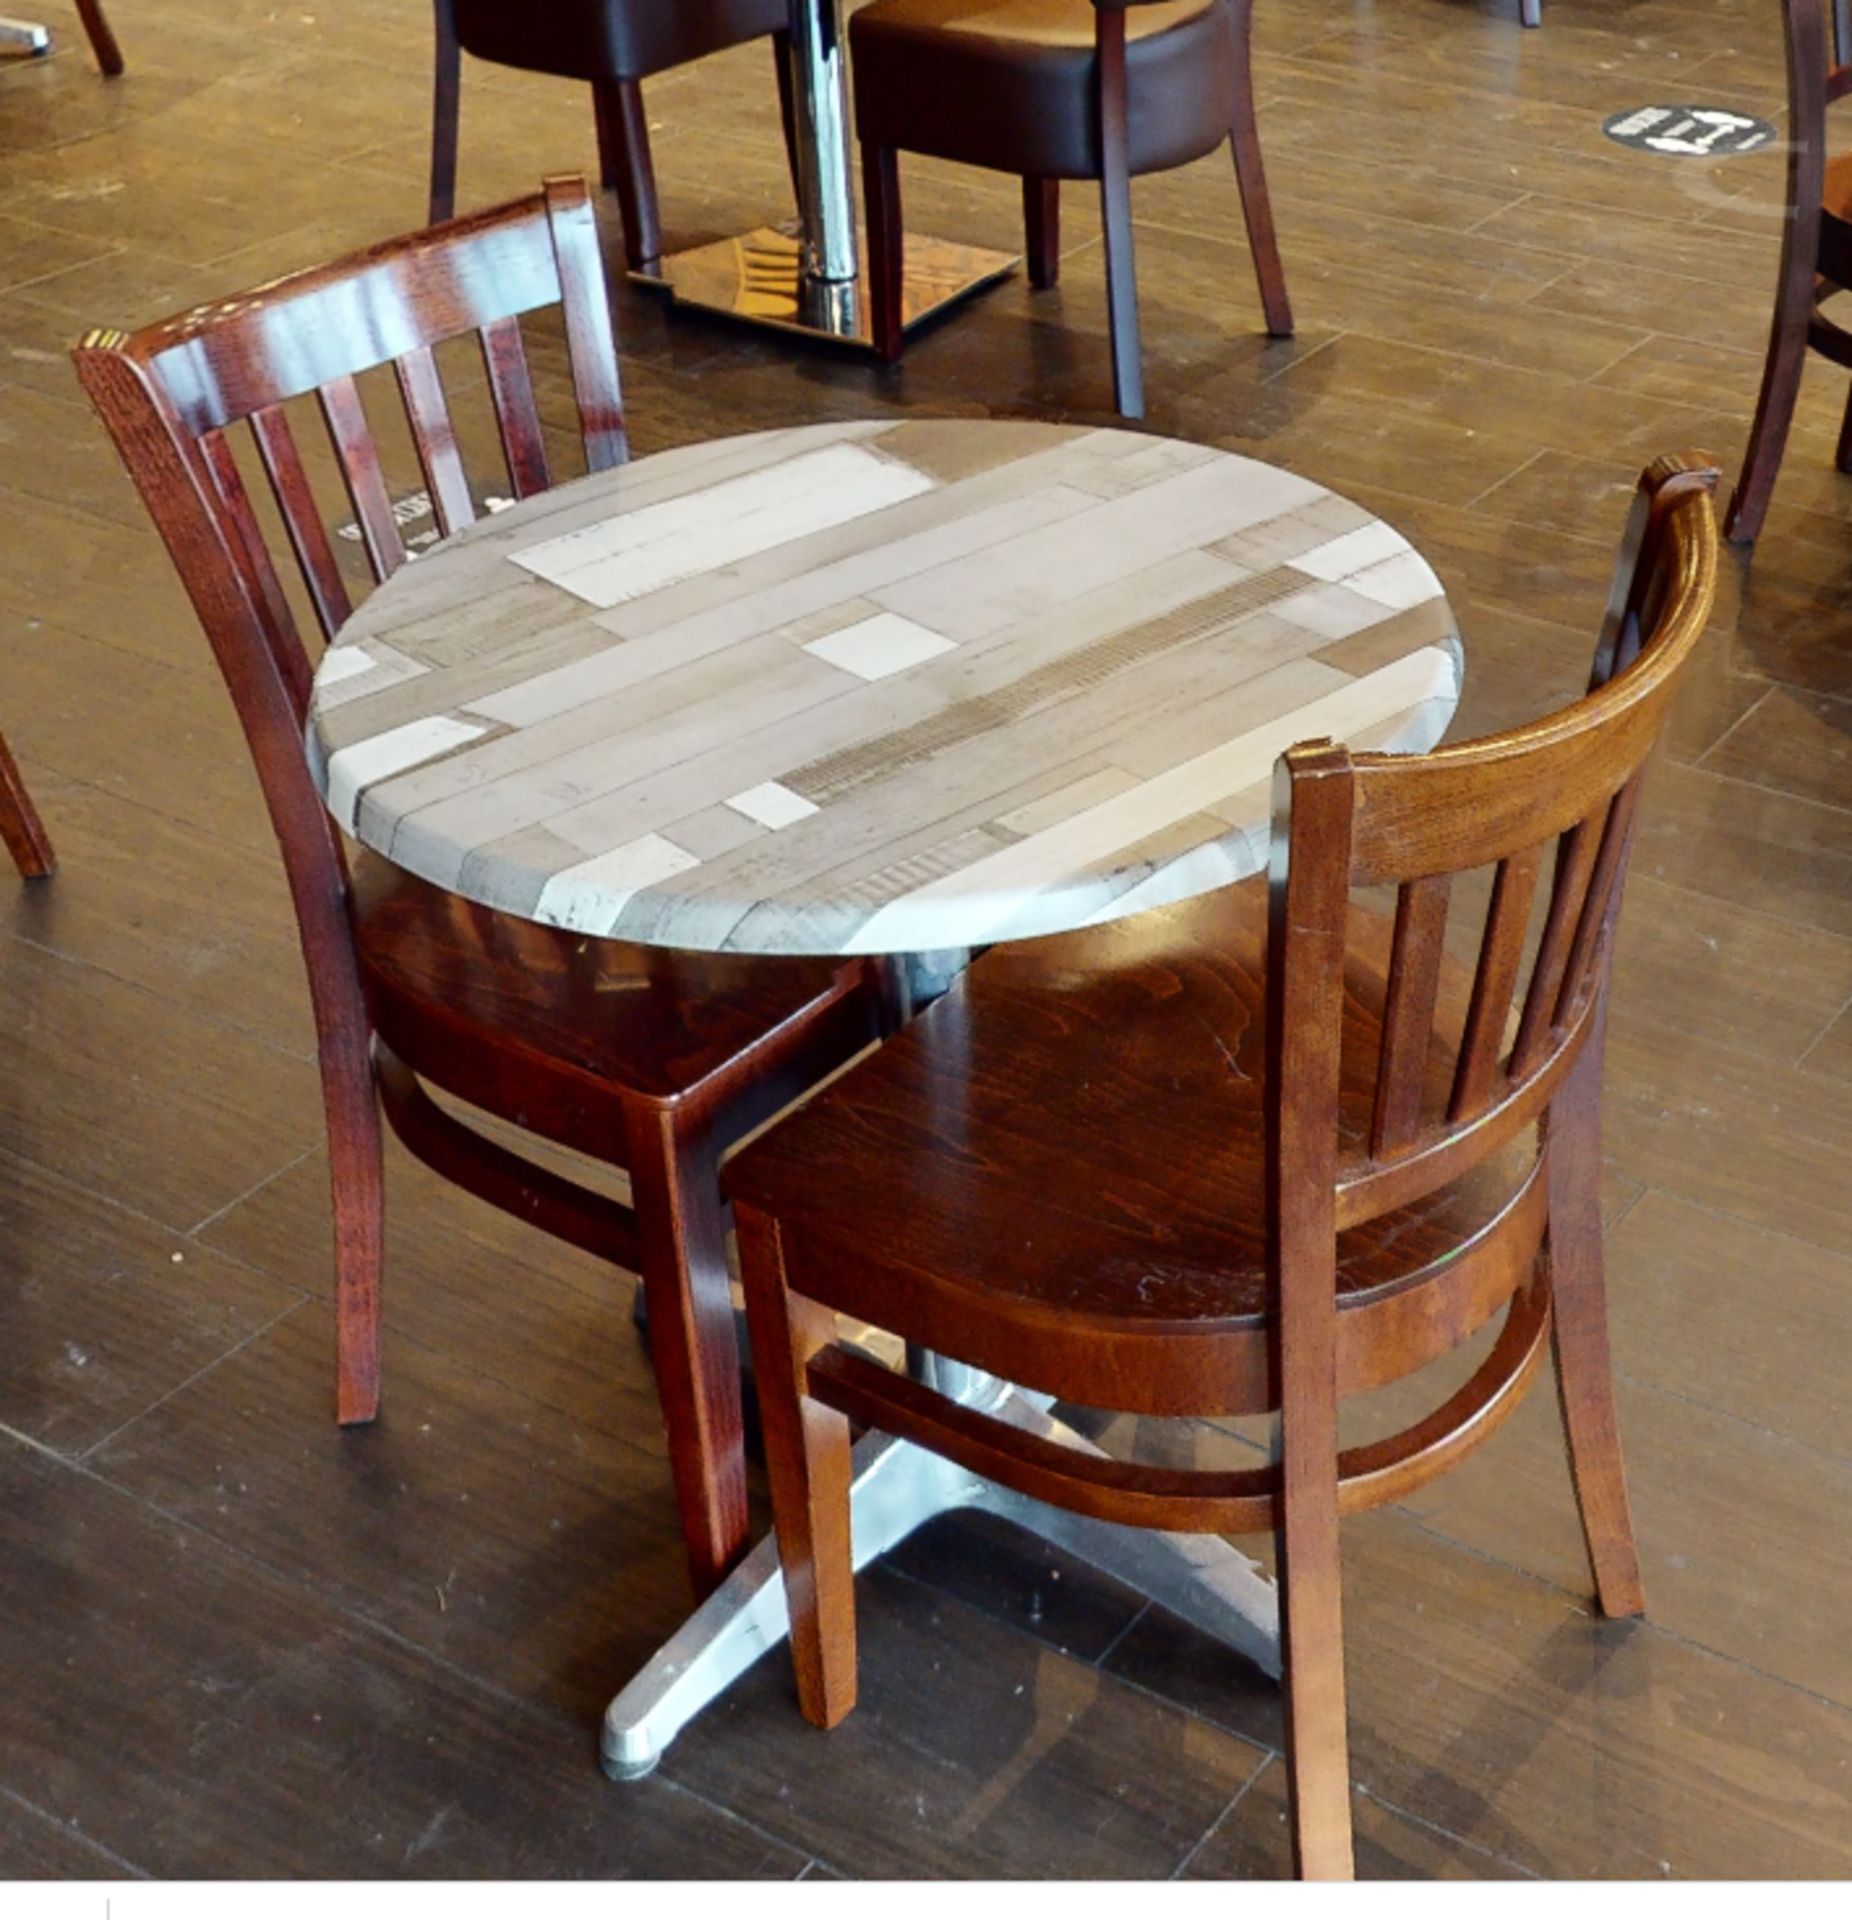 10 x Two Seater Restaurant Tables With Wood Panel Effect Tops and Chromes Bases - CL701 - - Image 6 of 9